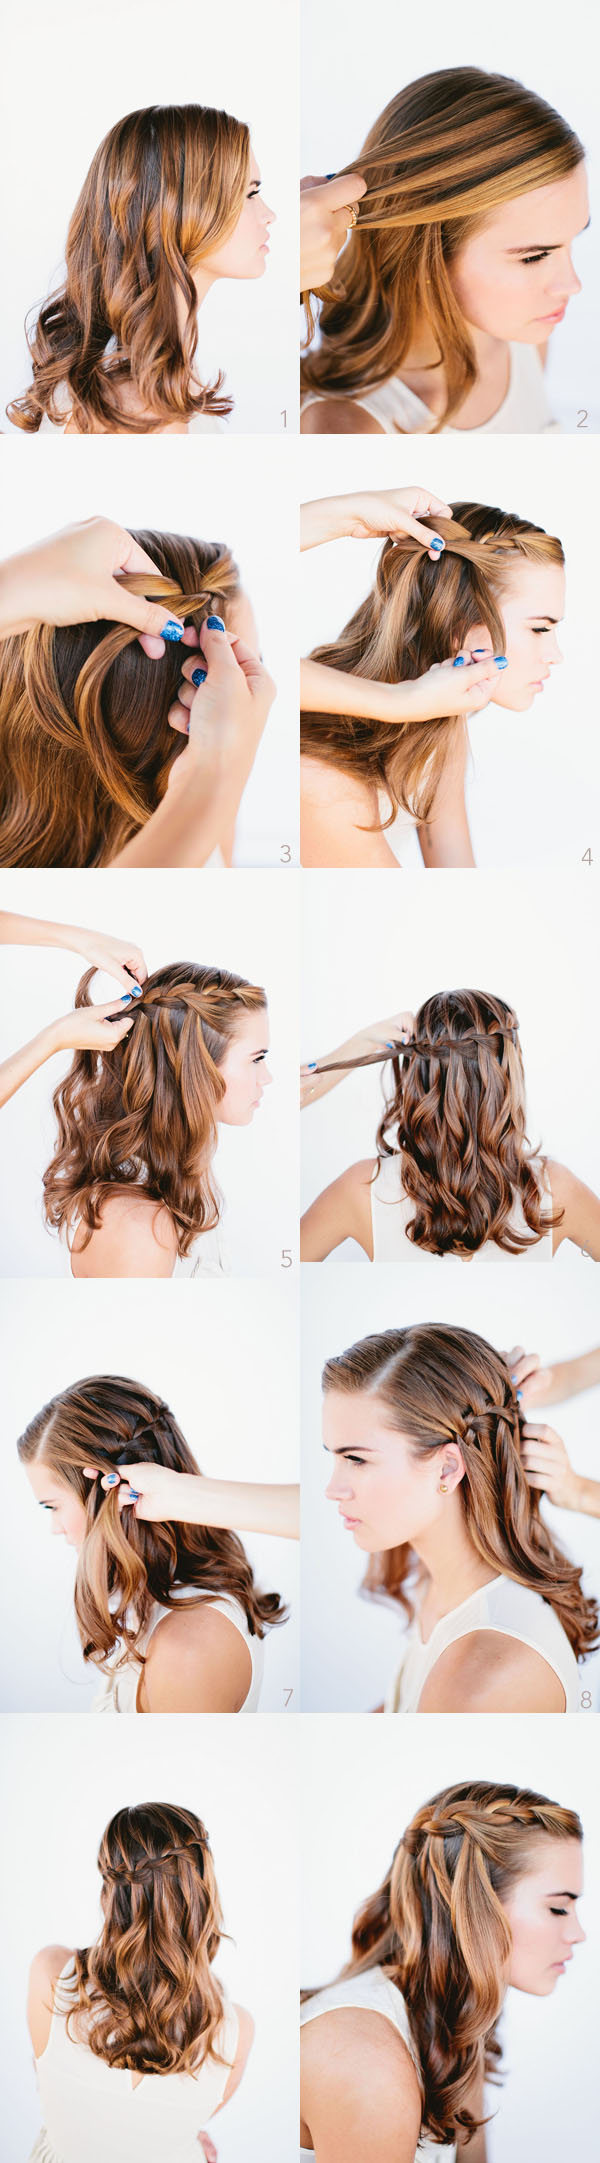 20 beautiful hairstyles for long hair step by step pictures